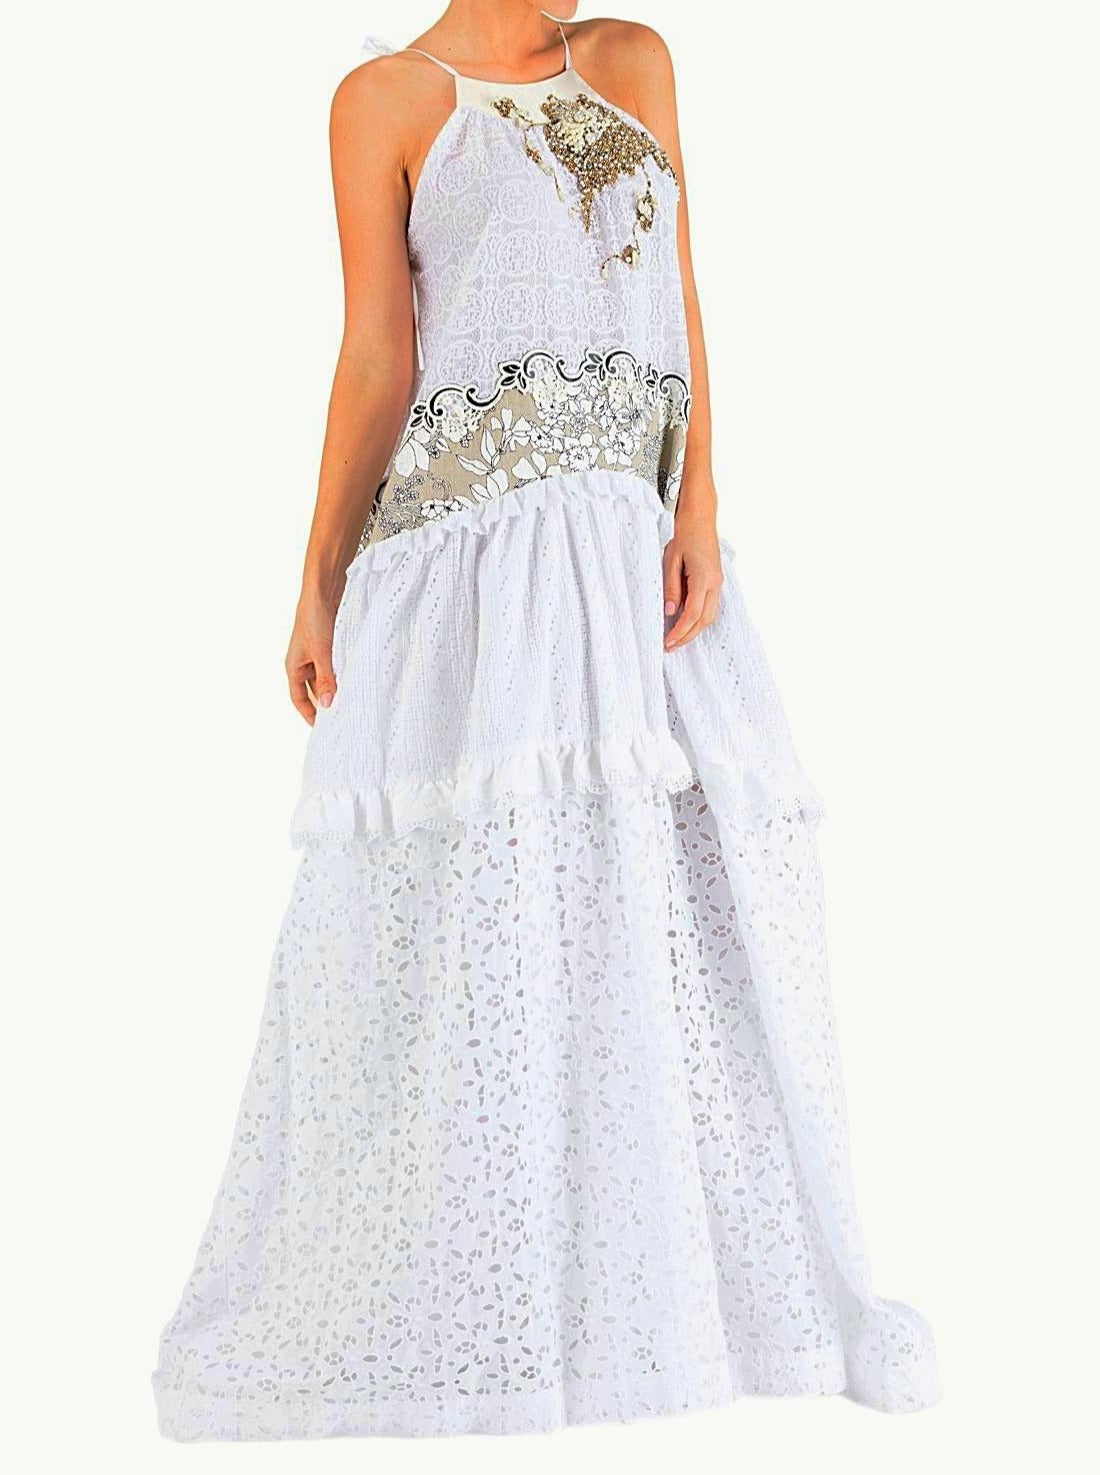 Pearls White Dress - 85% off